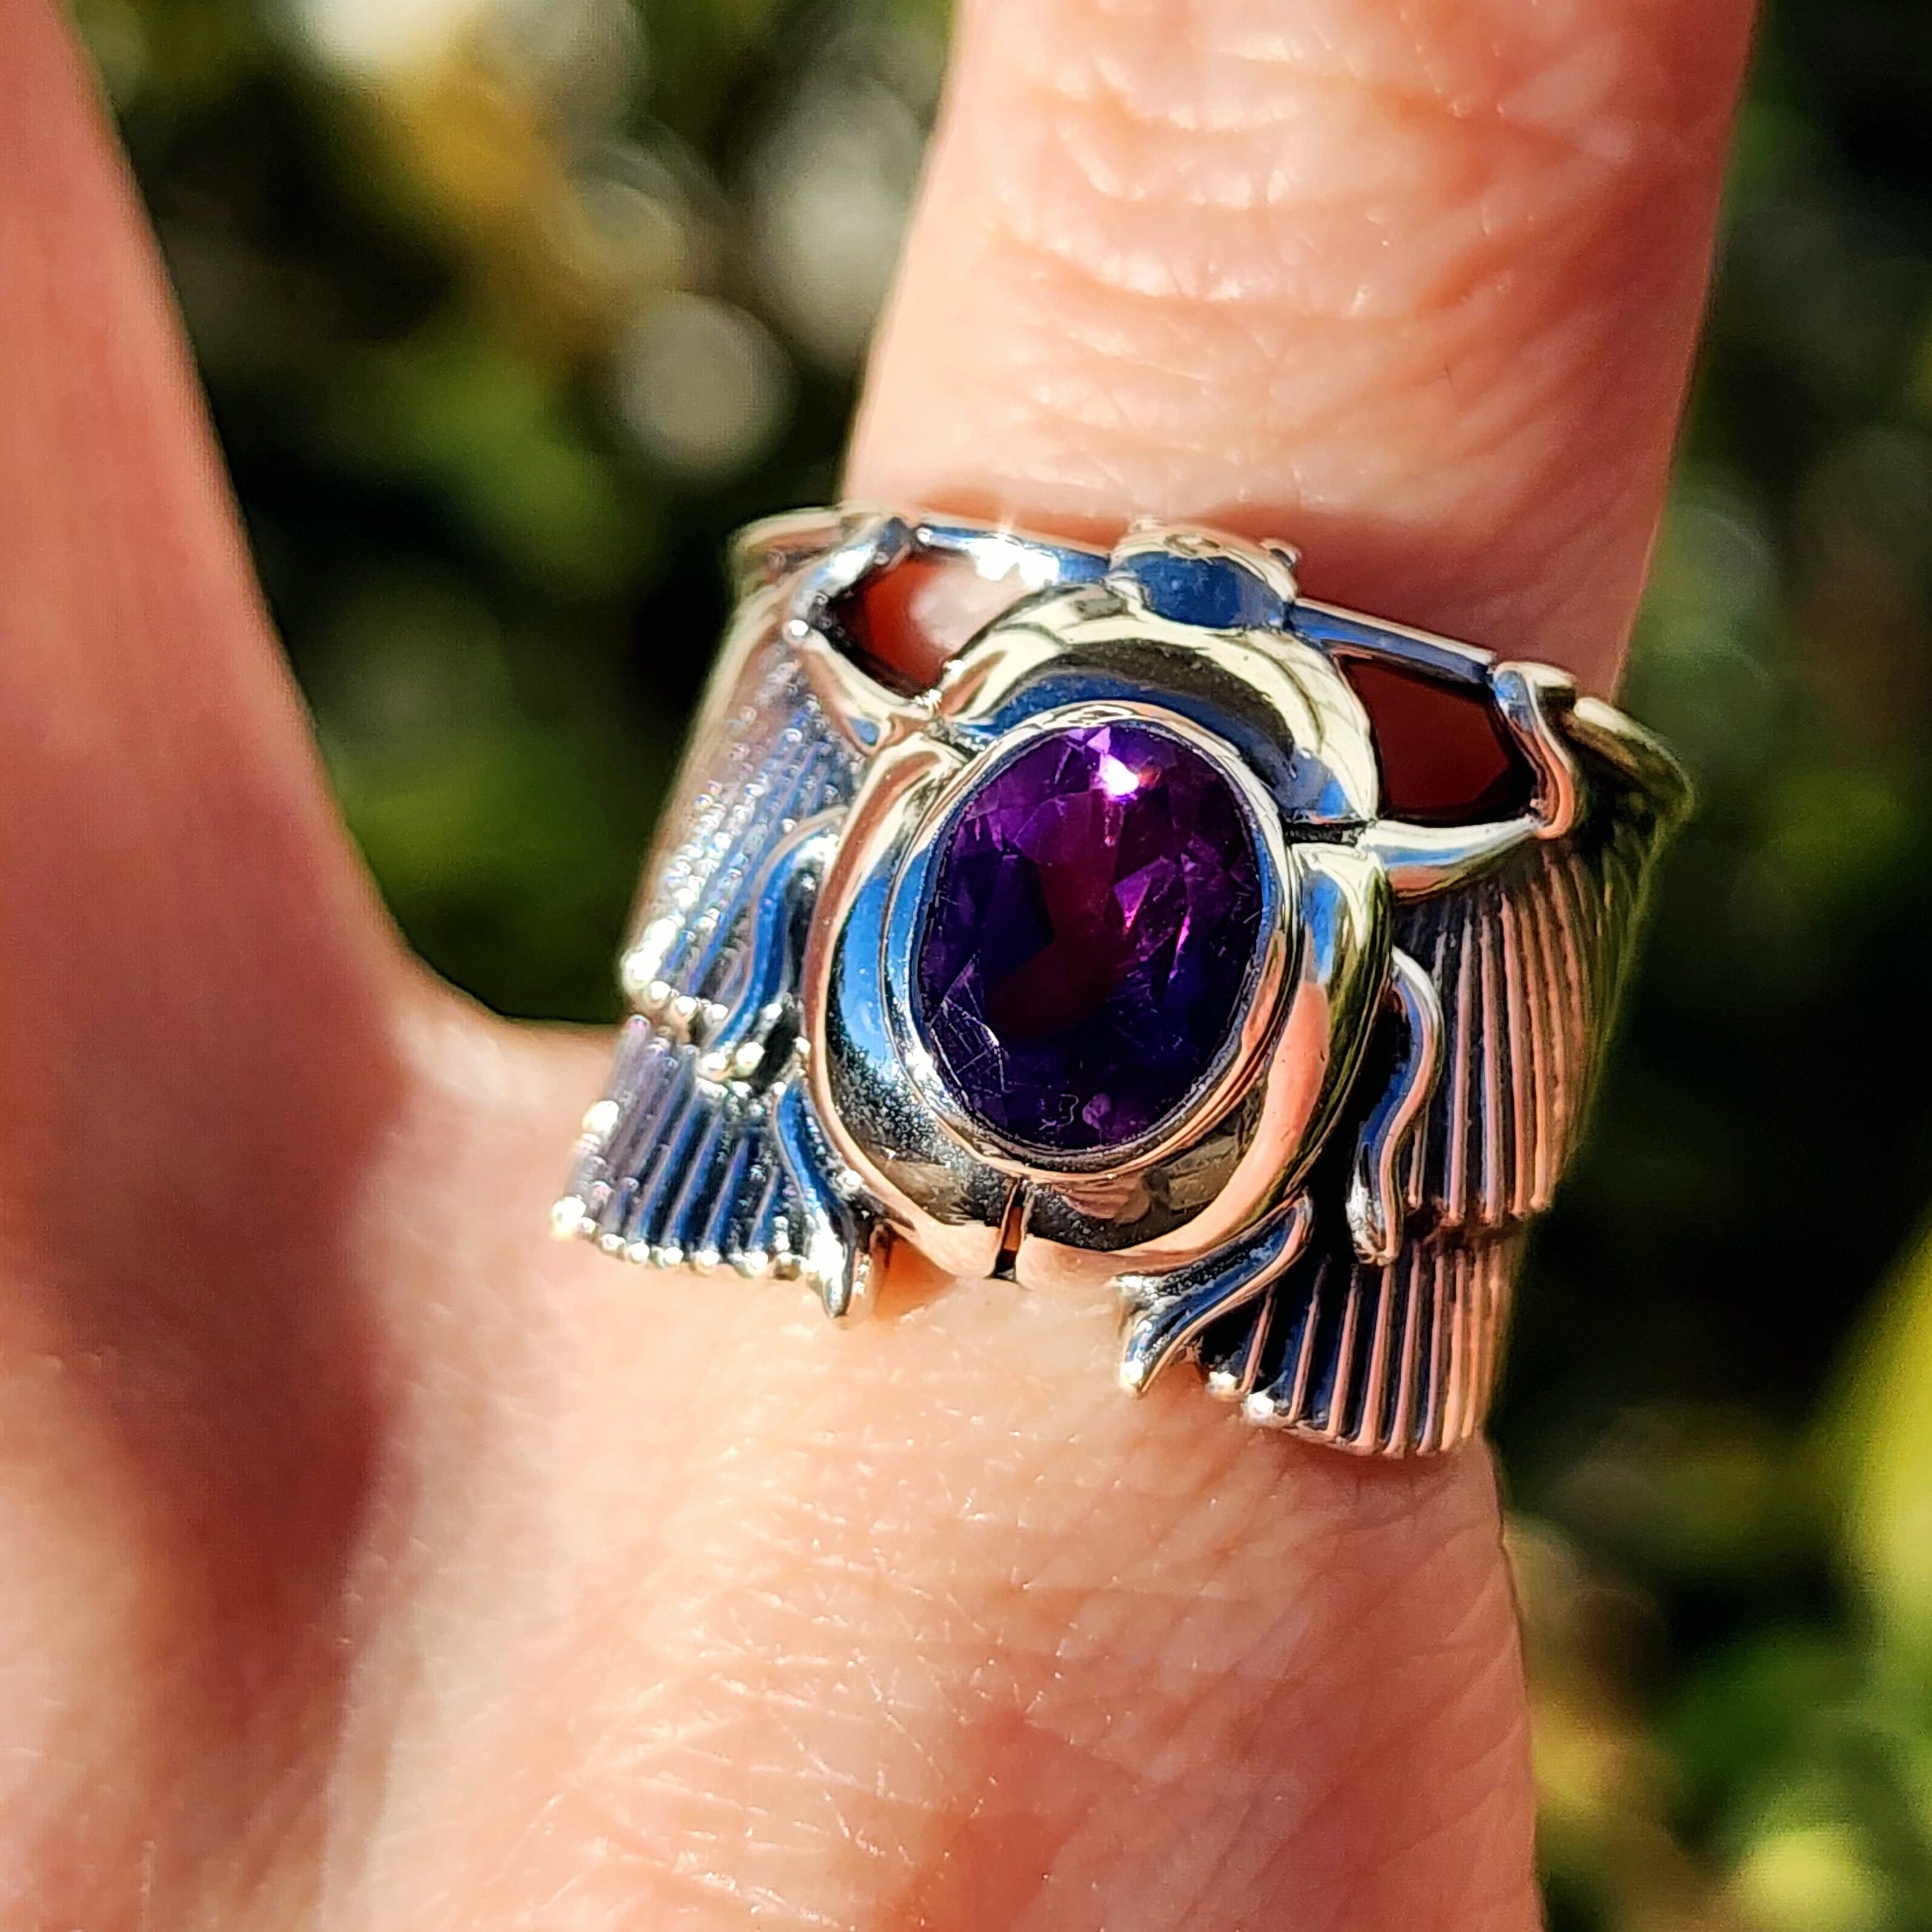 Amethyst Scarab Finger Cuff Adjustable Ring .925 Silver for Intuition, Luck, Protection and Purification